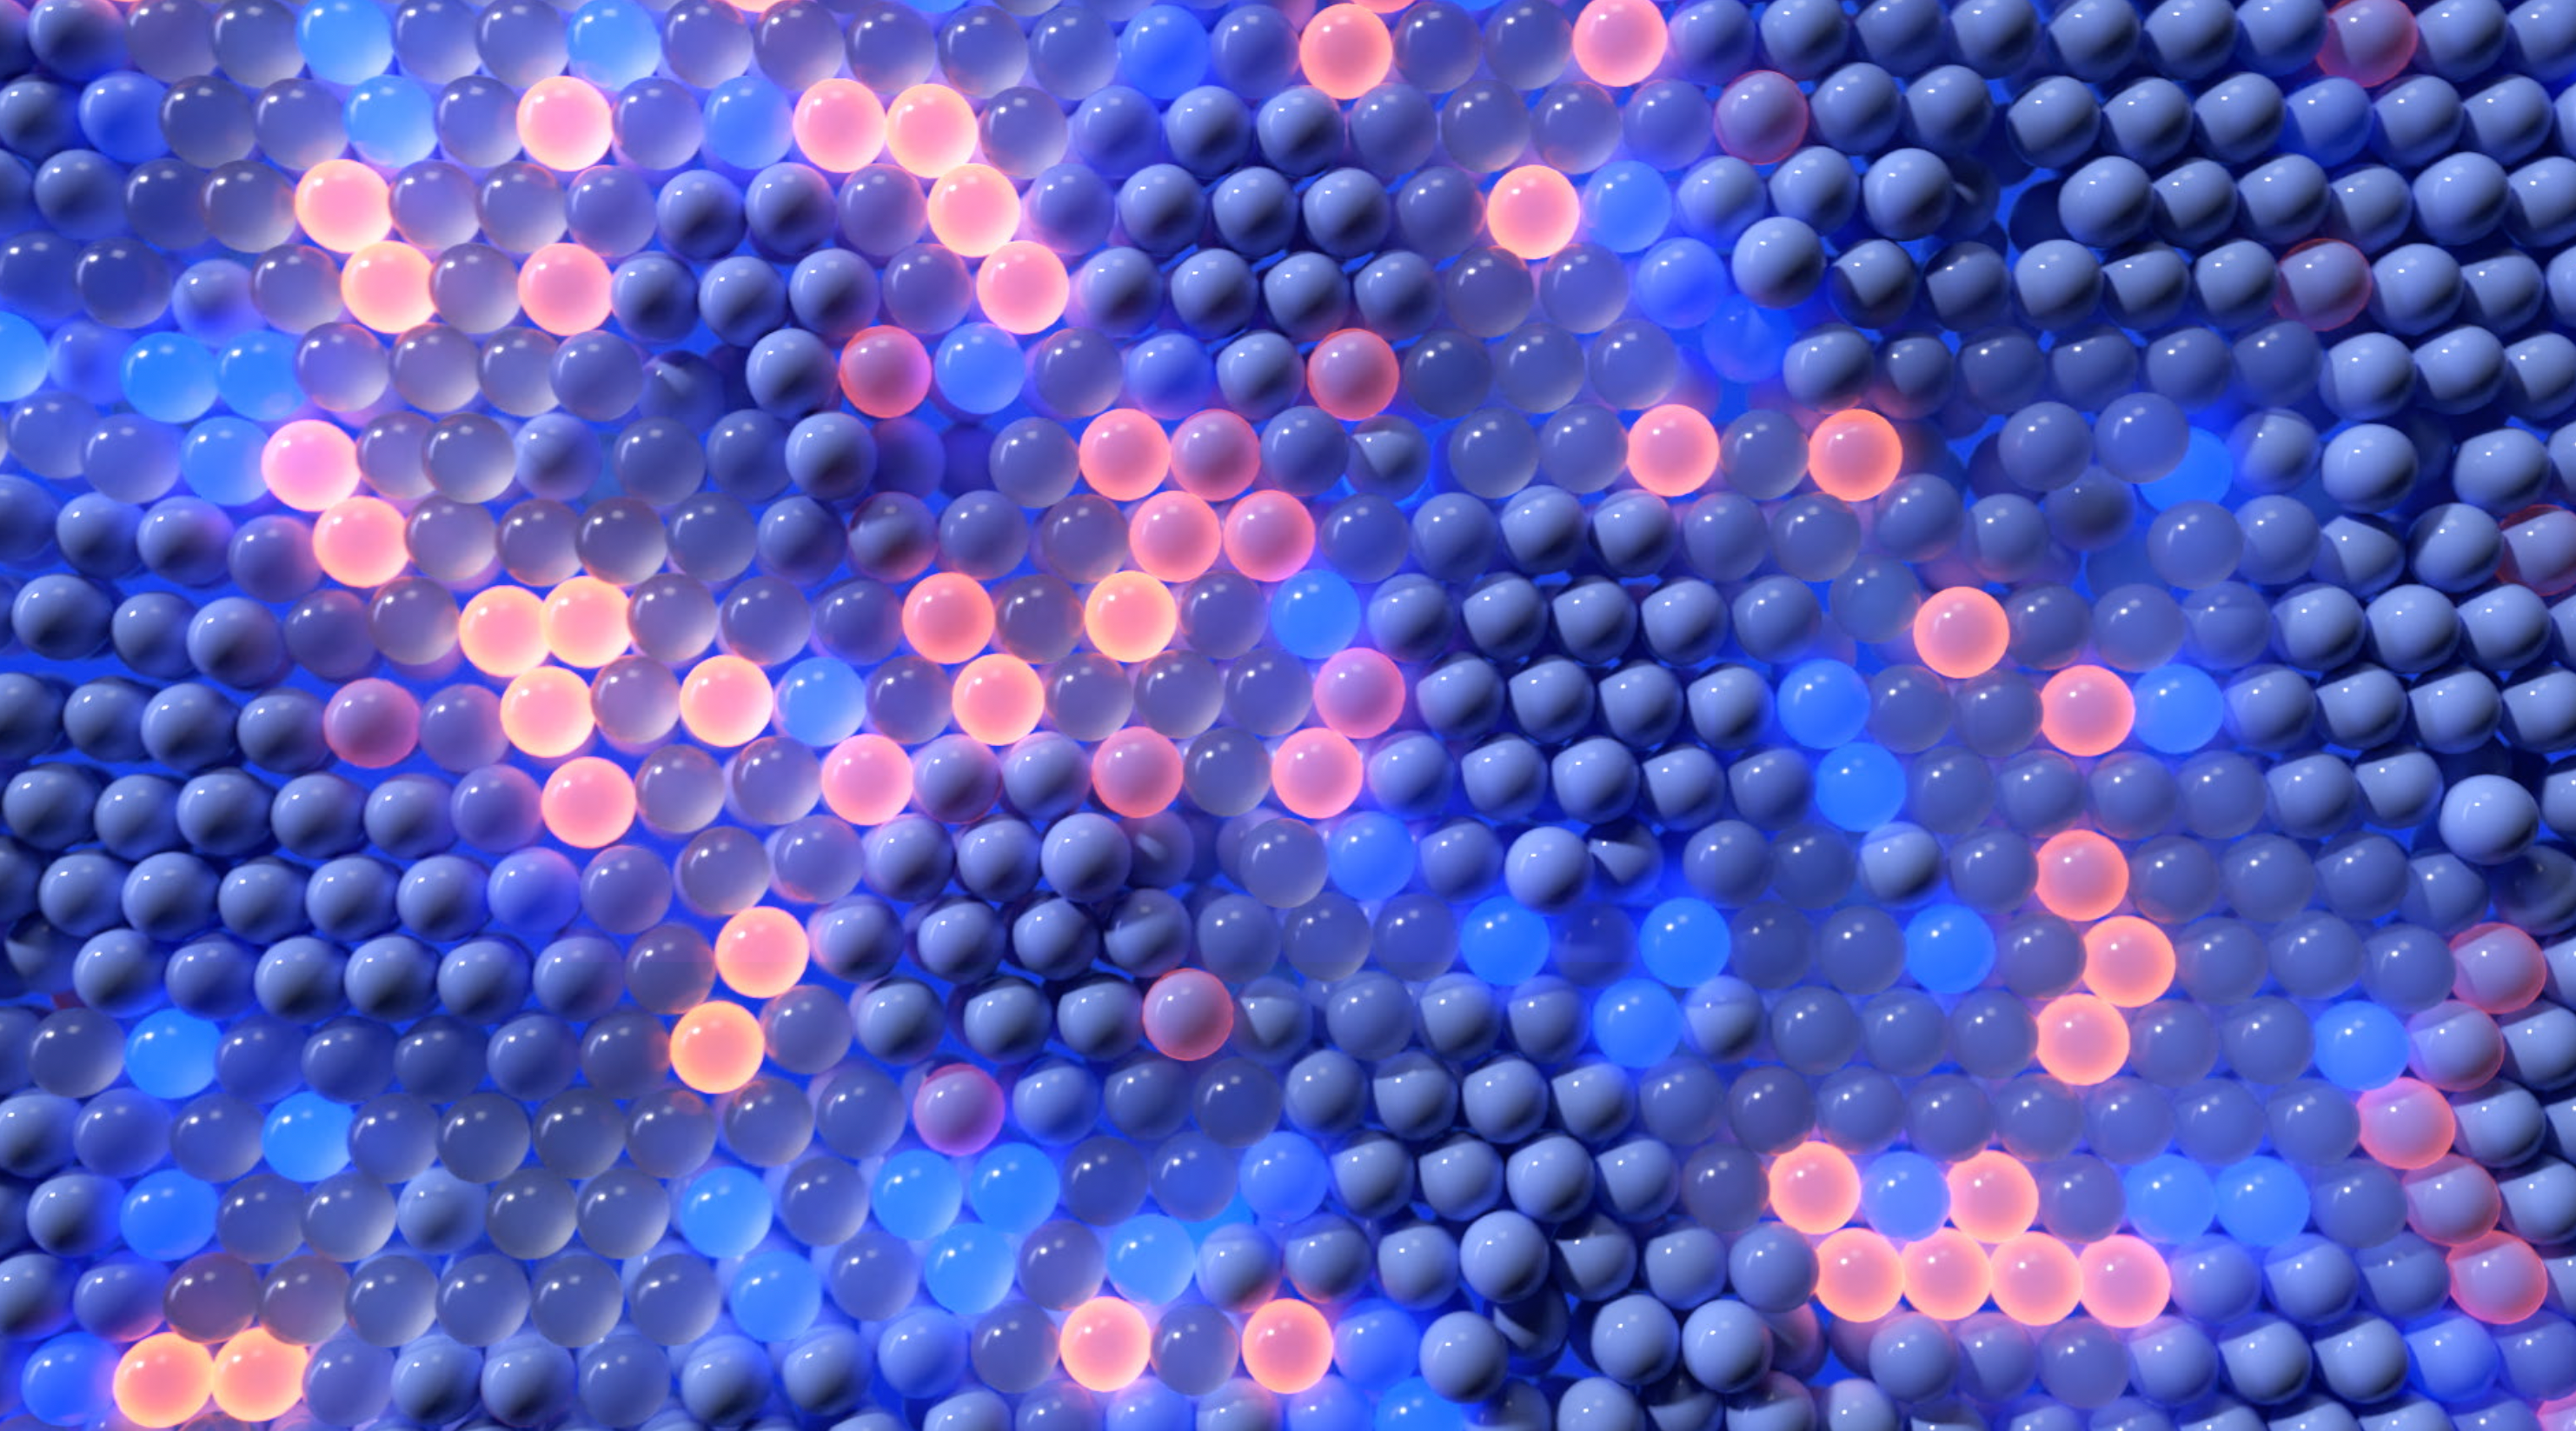 An abstract image showing a dense collection of translucent spheres in various shades of blue, pink, and purple. The spheres are illuminated, creating a glowing effect, and are arranged in a honeycomb-like pattern.